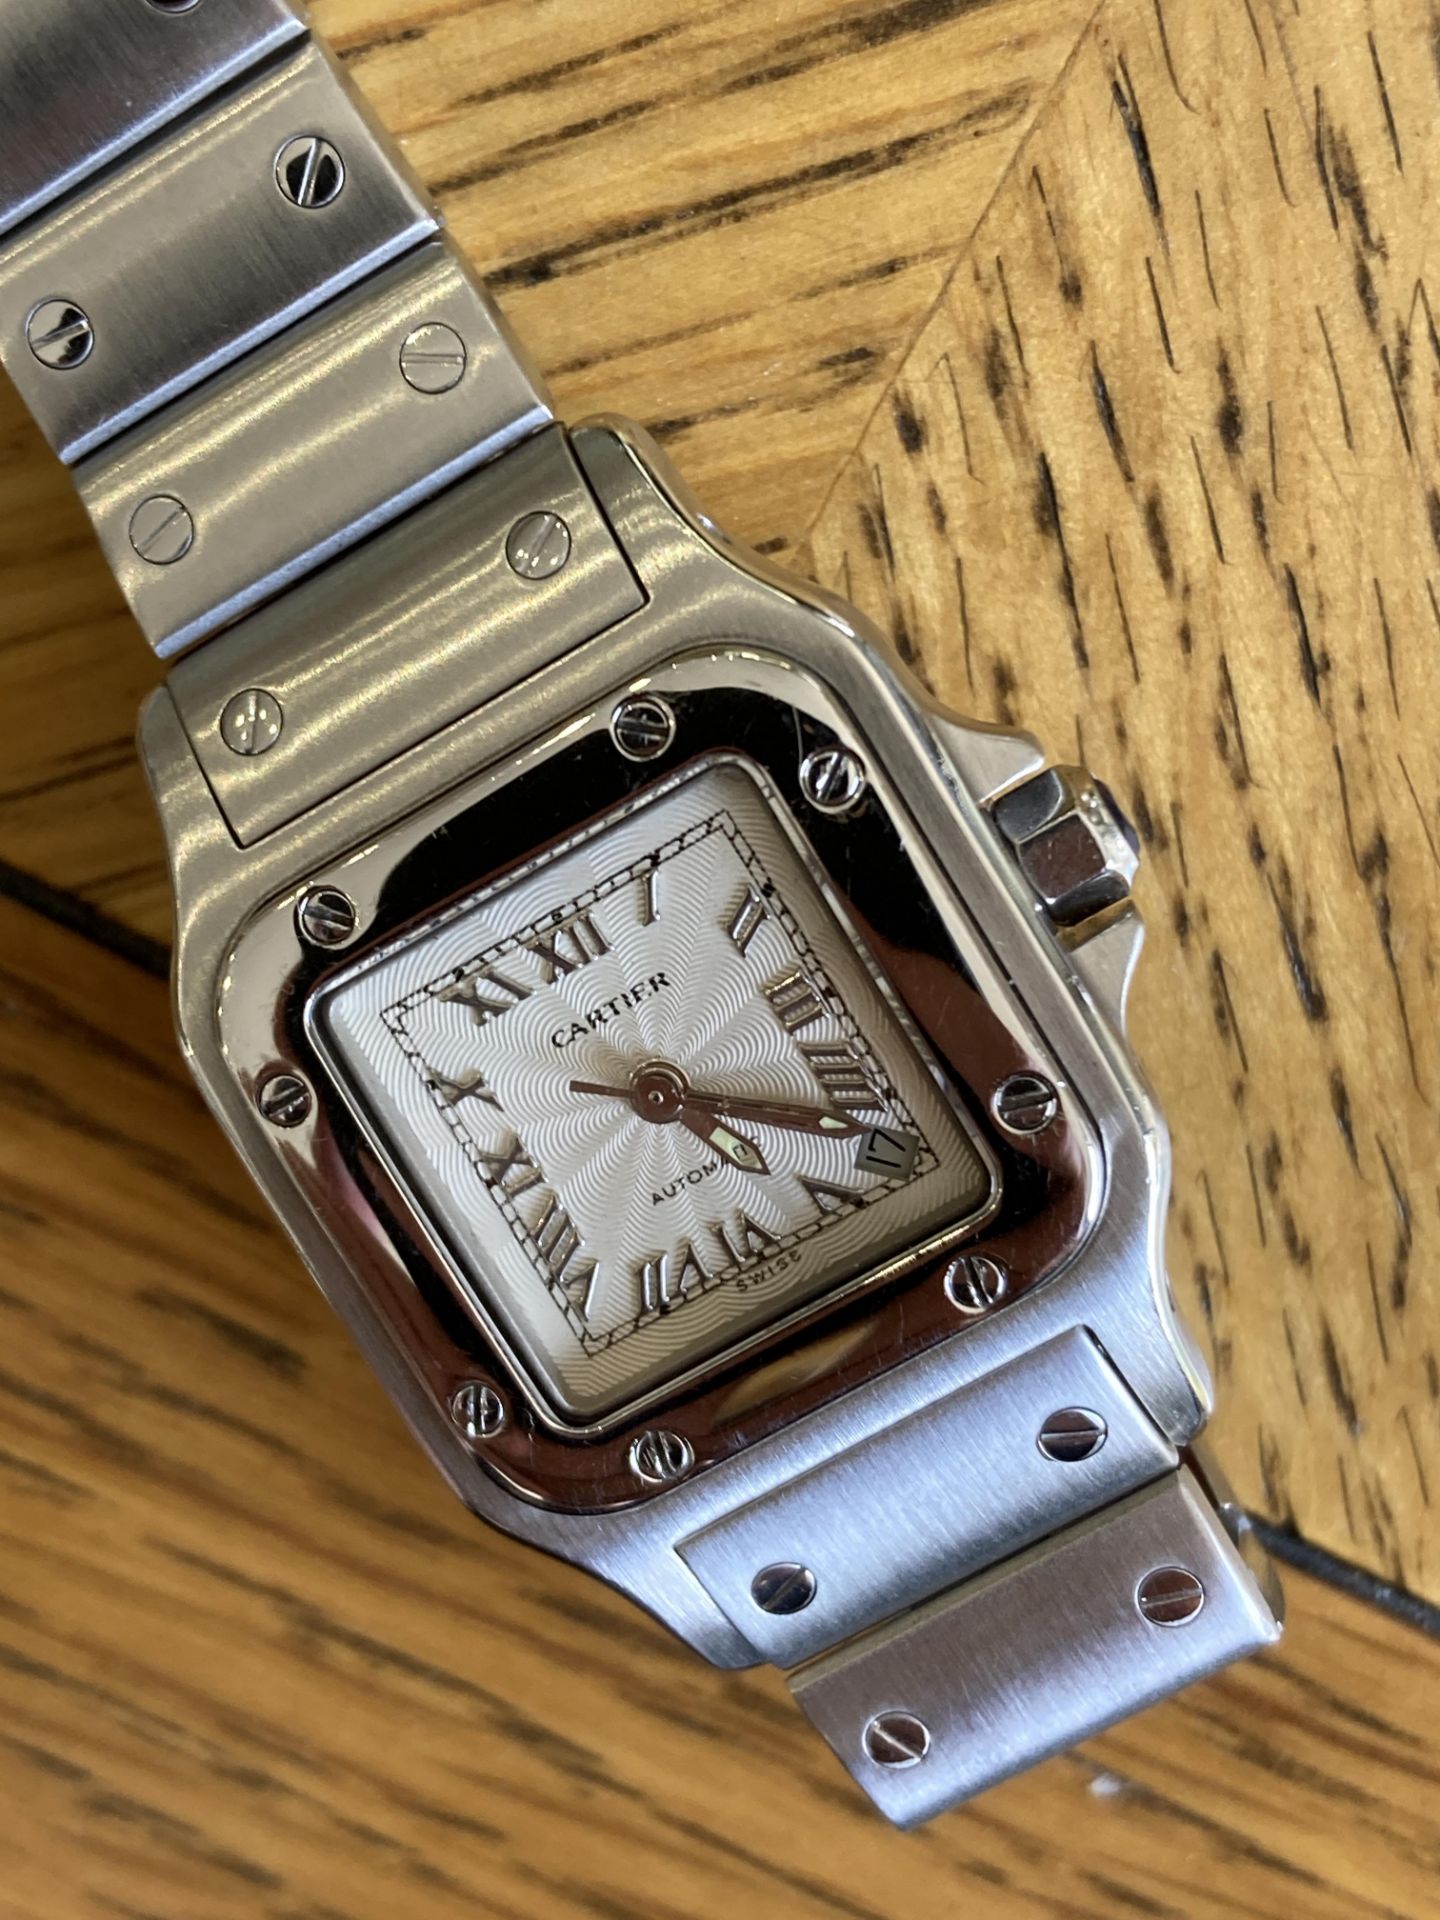 CARTIER SANTOS 24MM, STAINLESS STEEL, SILVER GUILLOCHE DIAL - Image 5 of 9